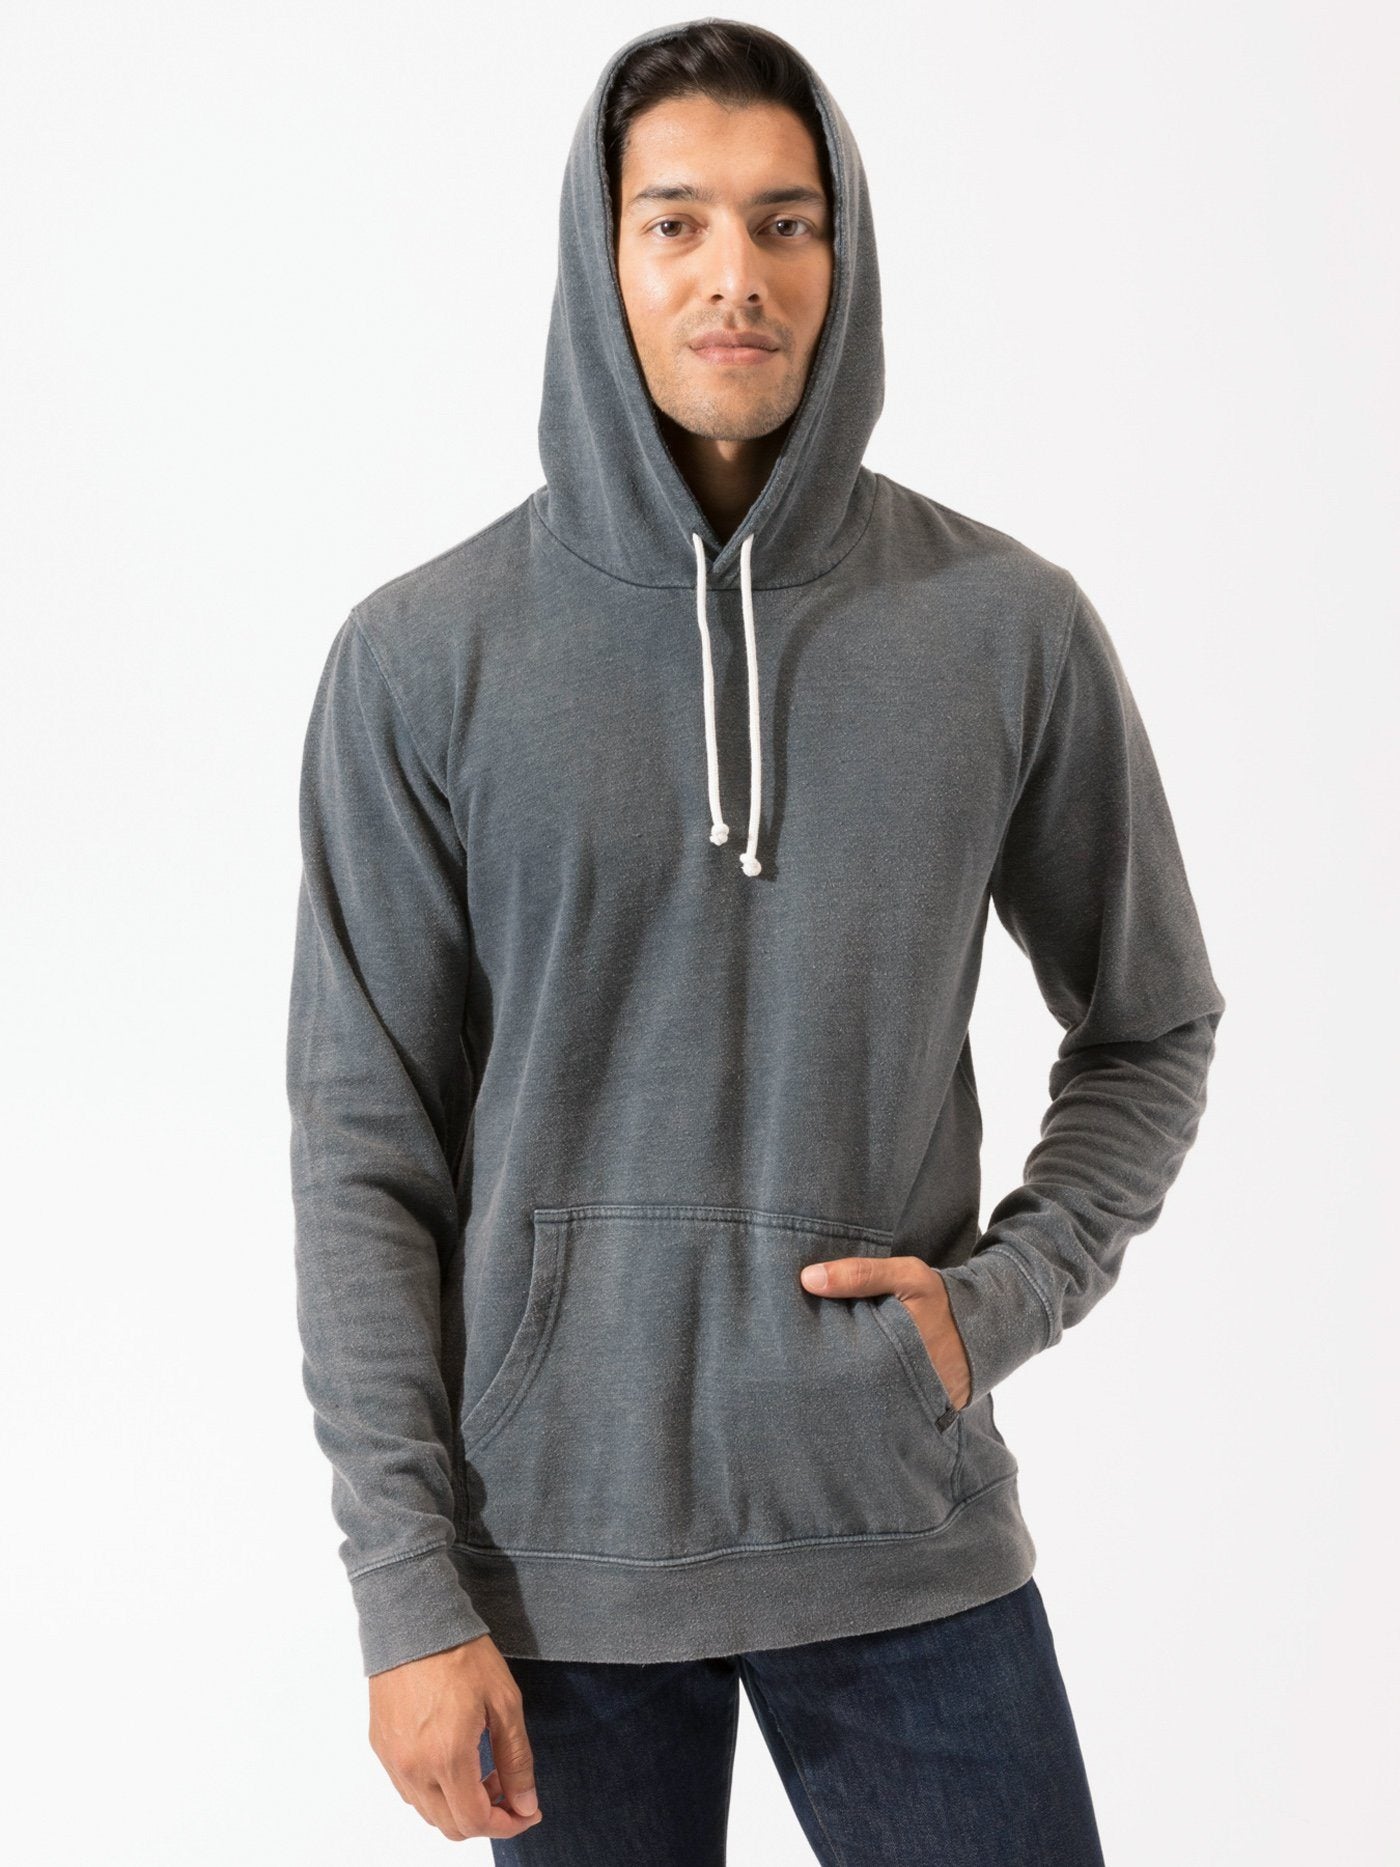 Mineral Wash Pullover Hoodie Mens Outerwear Sweatshirt Threads 4 Thought 